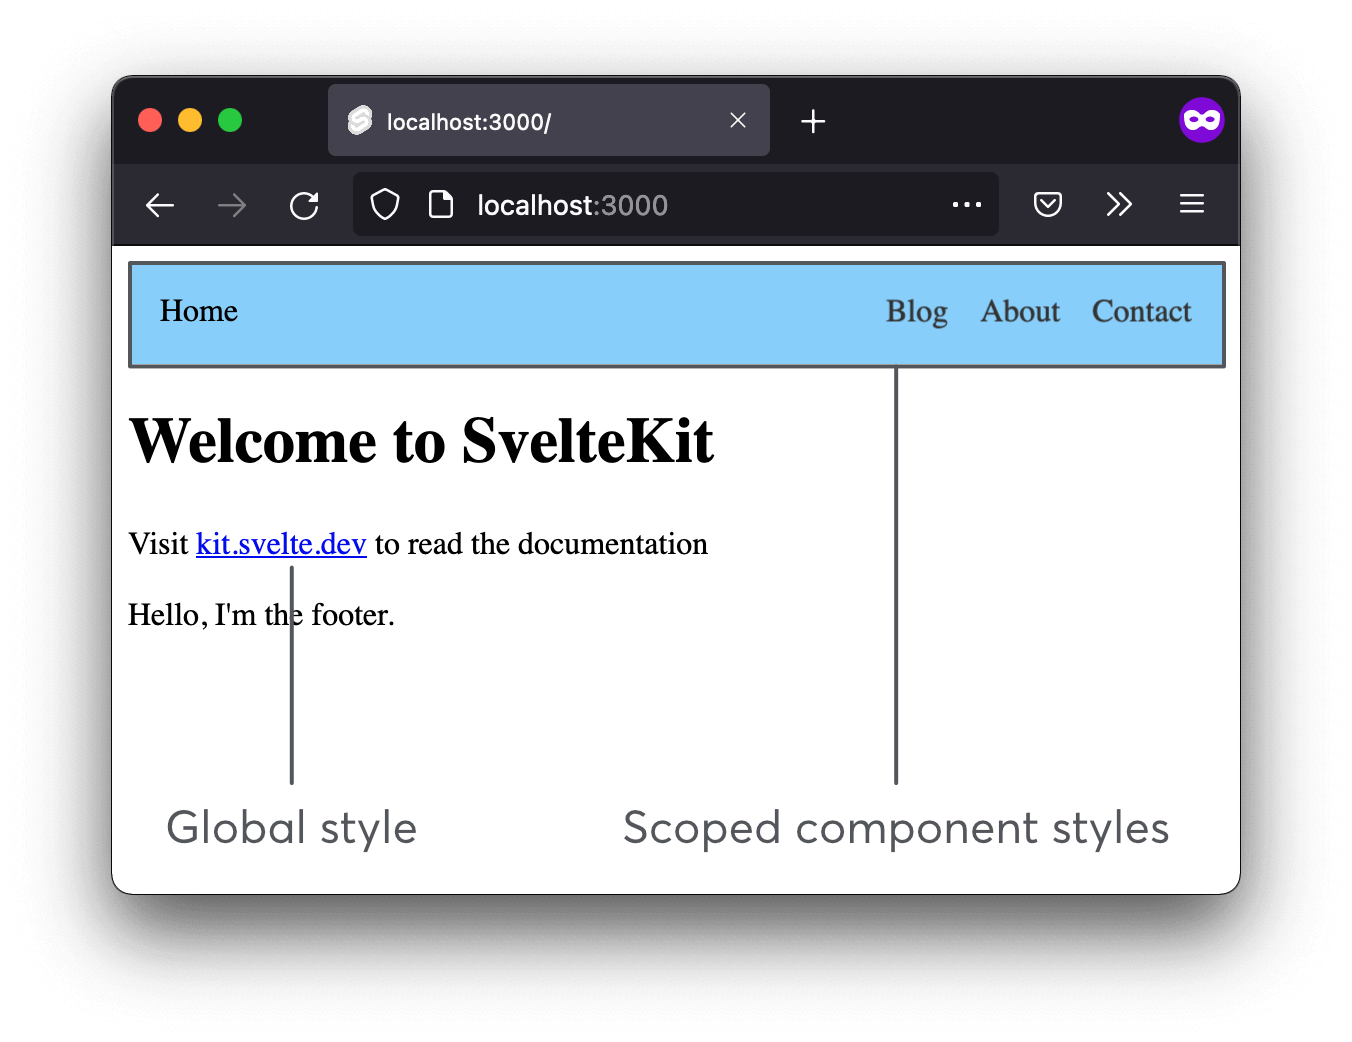 The links in our Header component are not underlined or blue, but links outside the component remain with the default styling.